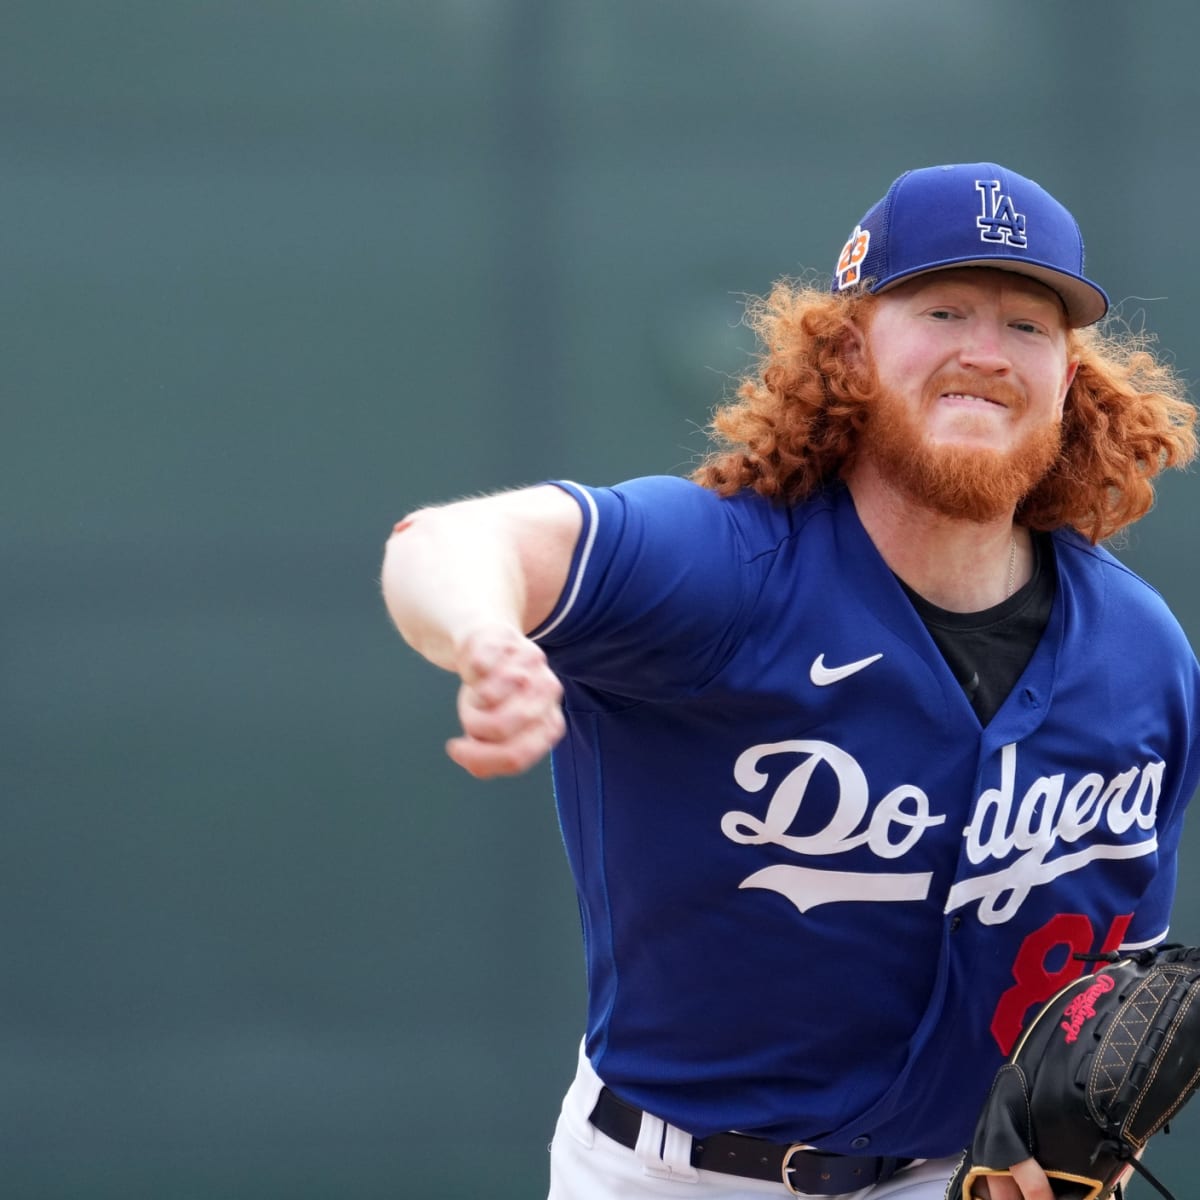 Dodgers News: Dustin May Only Knows '100 Percent' Effort Every